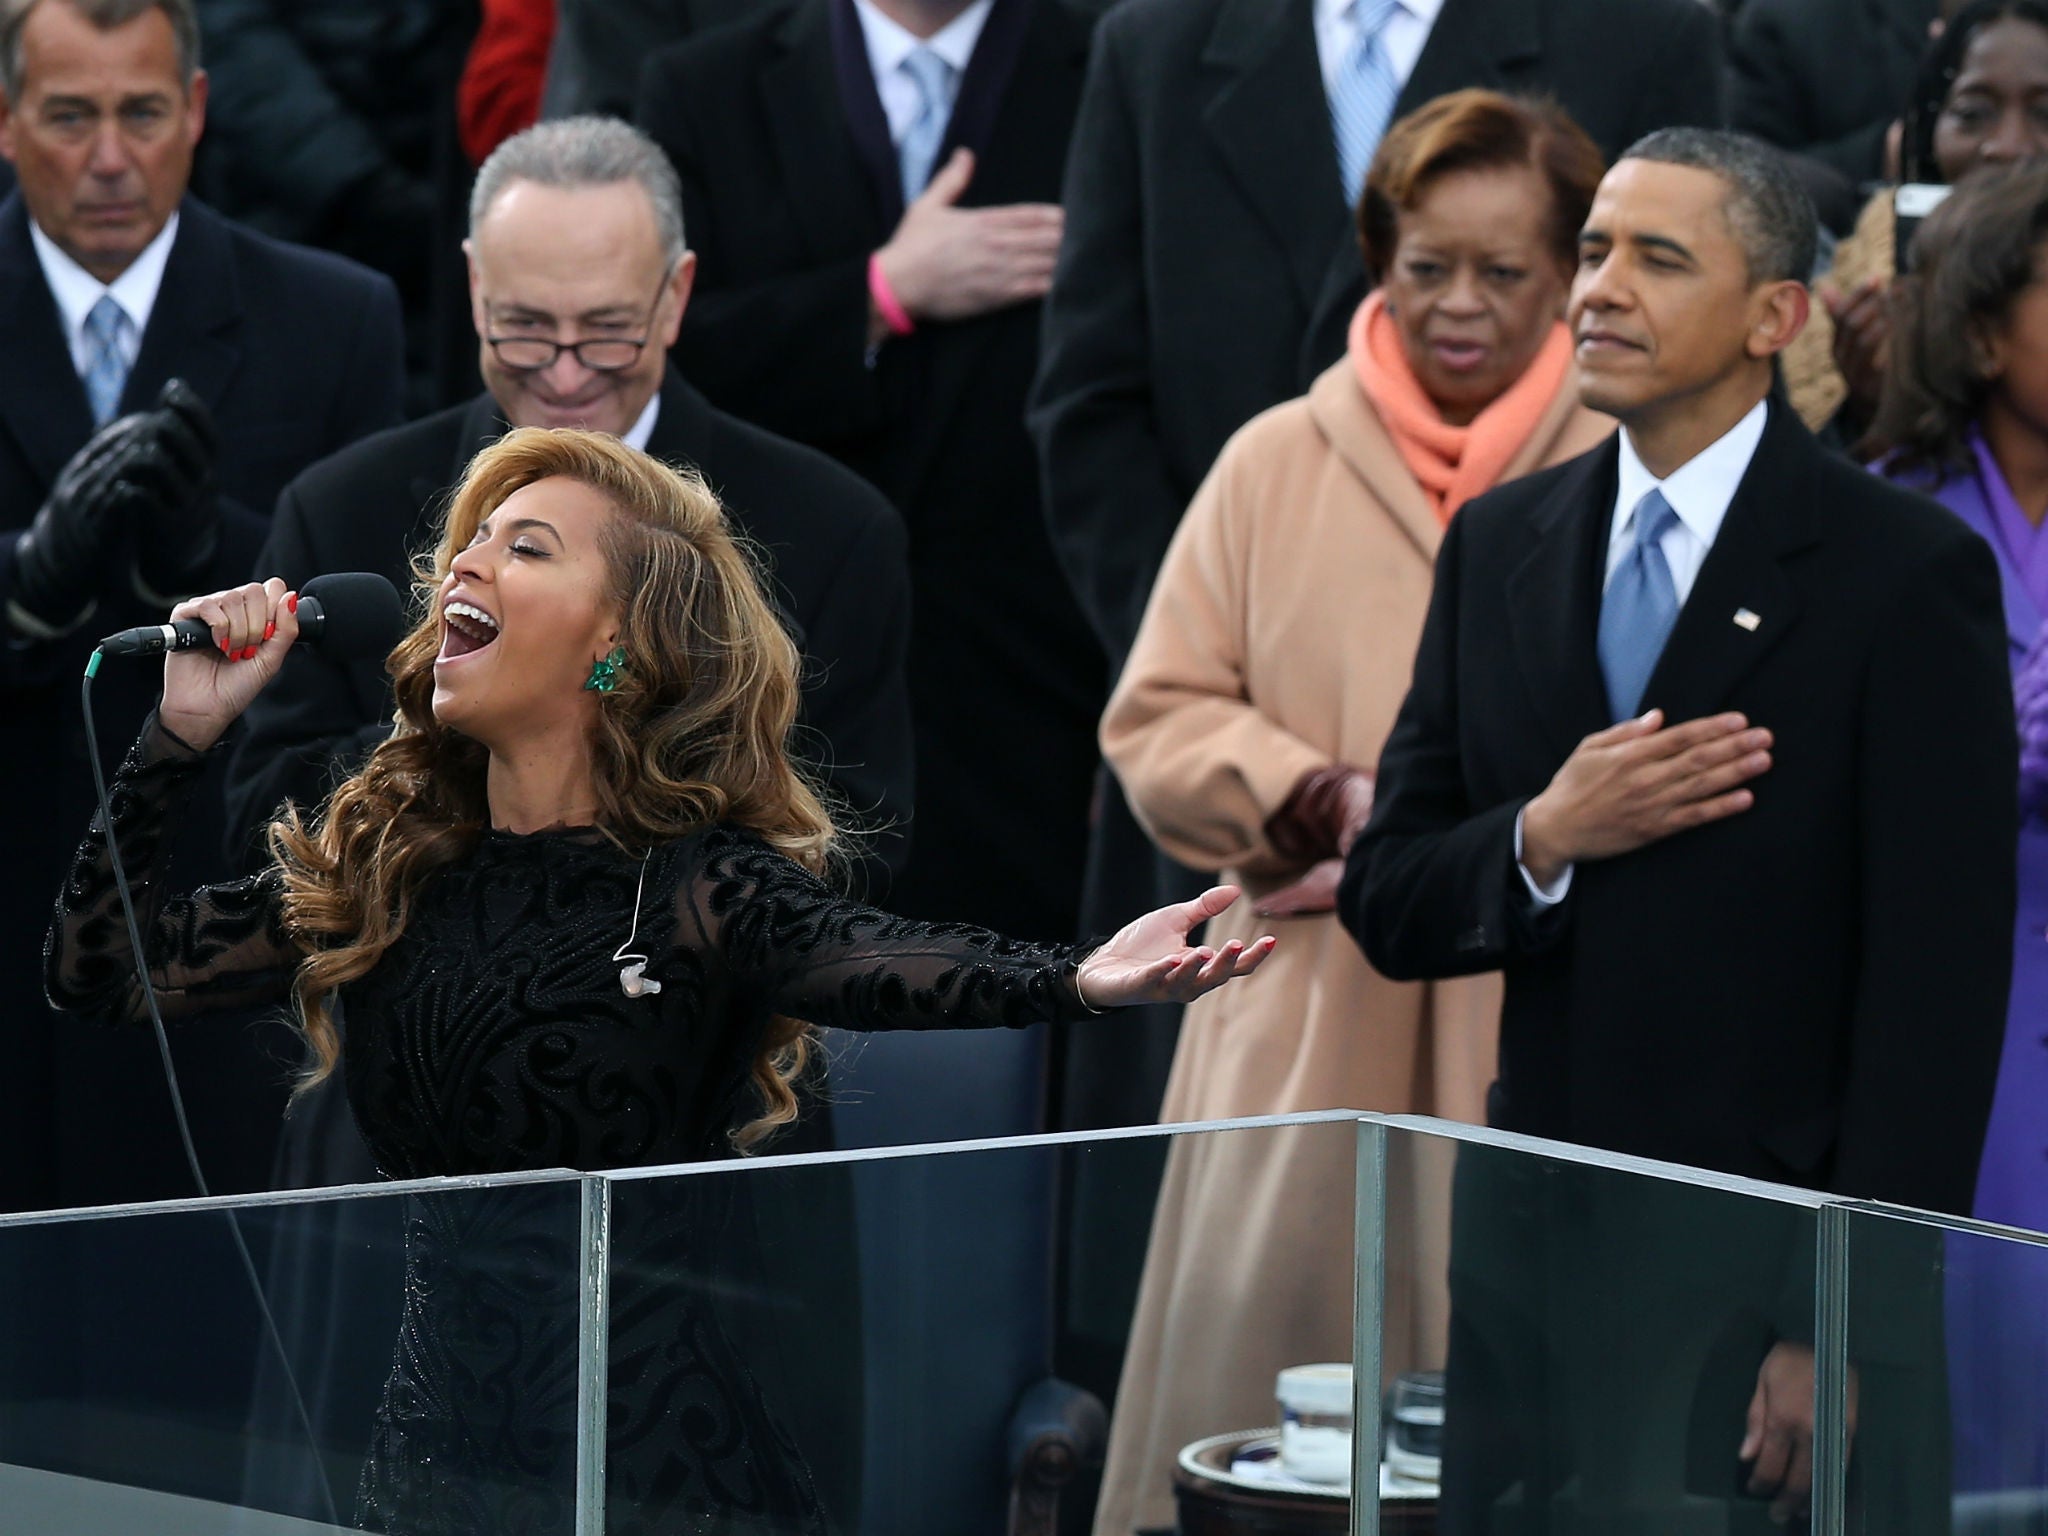 Beyonce sings the national anthem at Obama's Inauguration in 2013